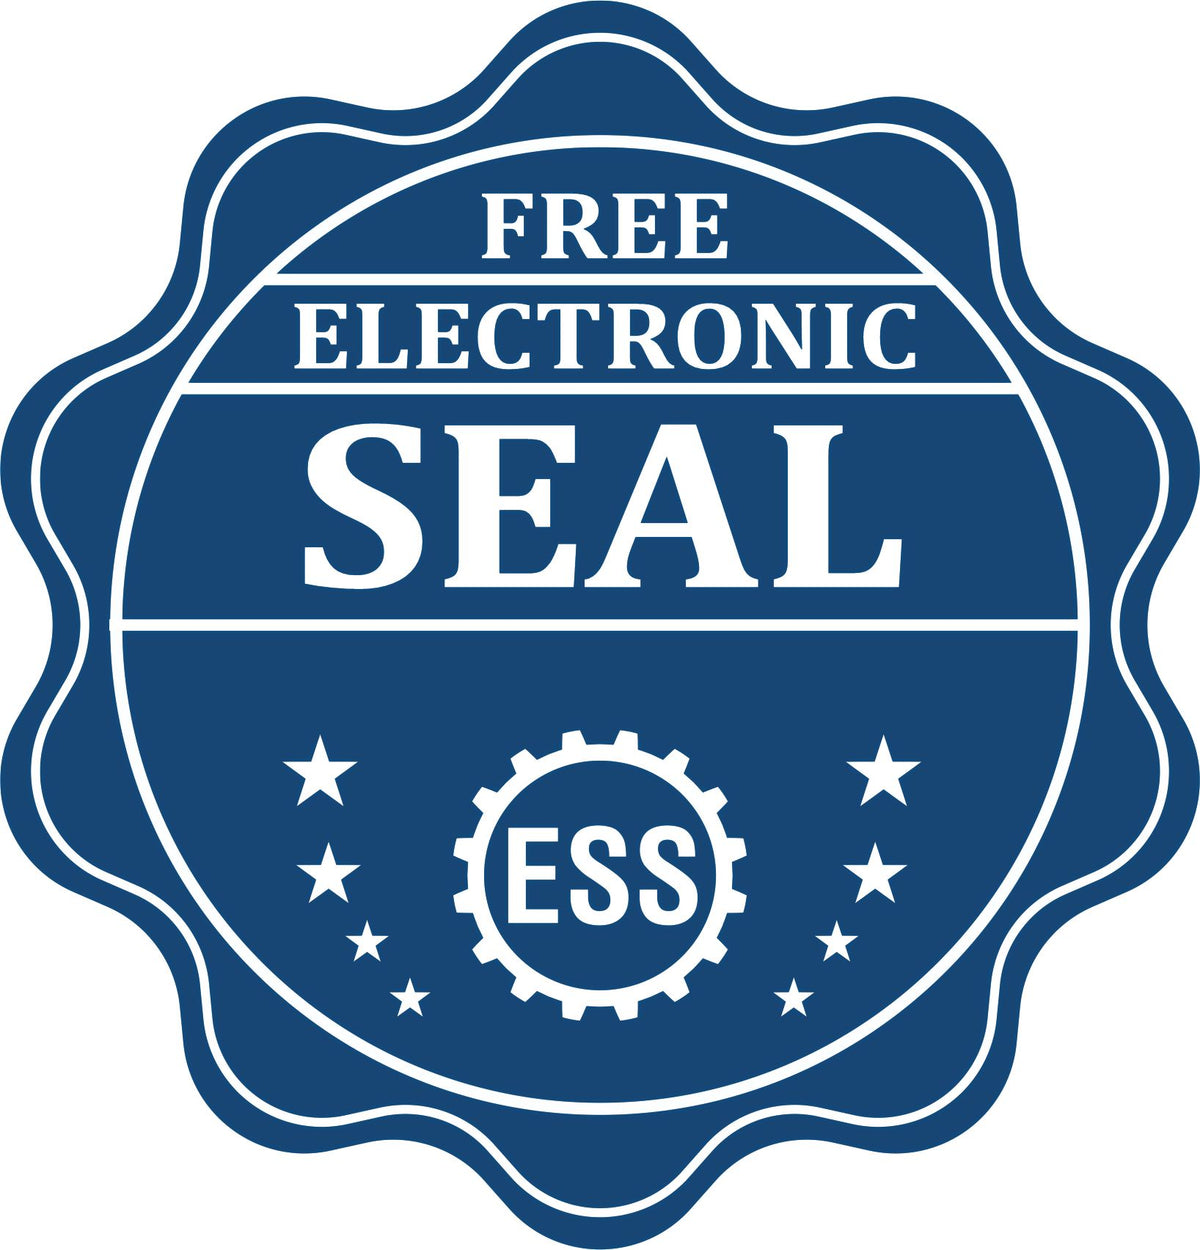 A badge showing a free electronic seal for the Gift Missouri Engineer Seal with stars and the ESS gear on the emblem.